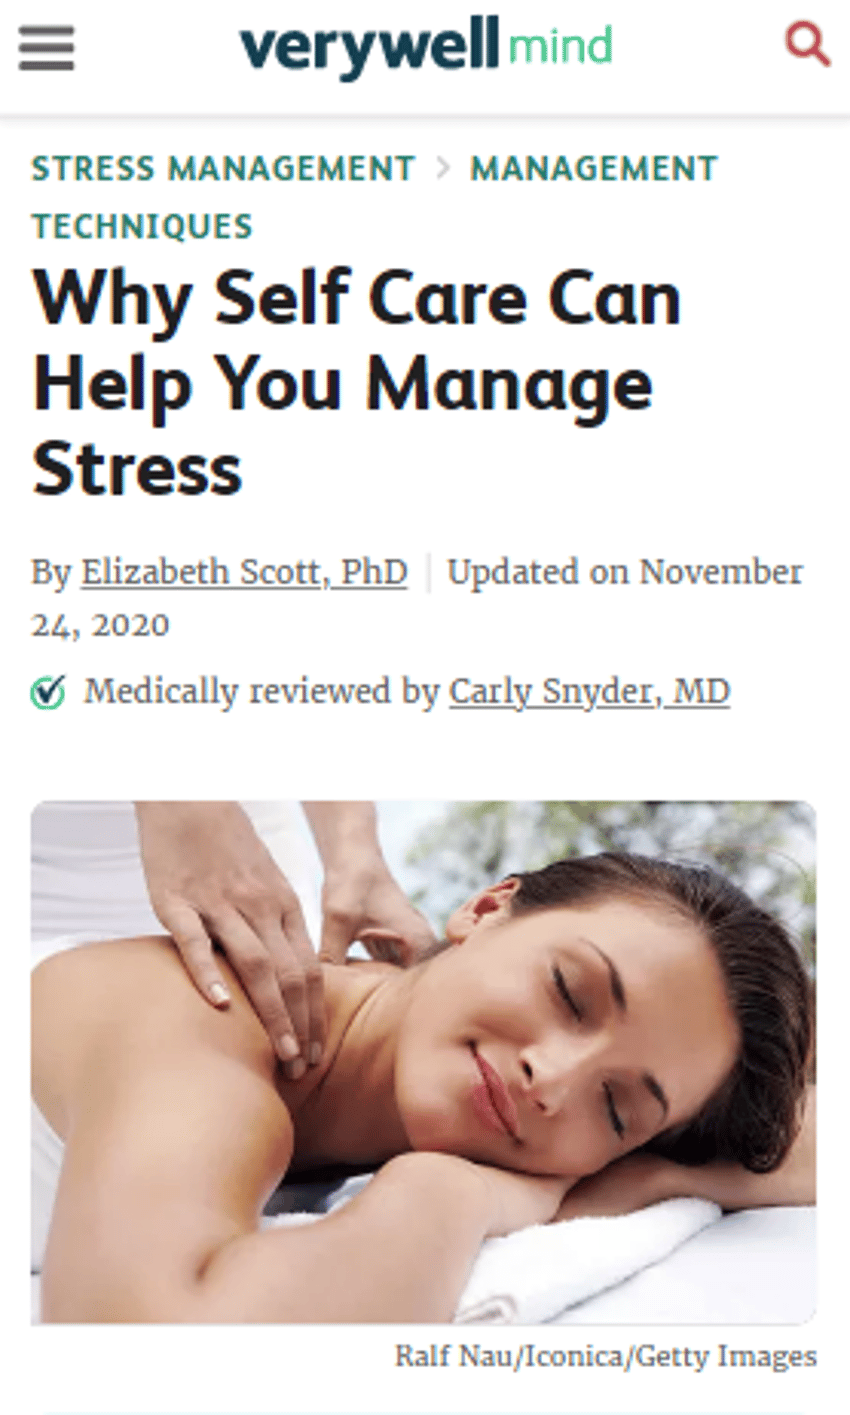 check out the full post [here](https://www.verywellmind.com/importance-of-self-care-for-health-stress-management-3144704)